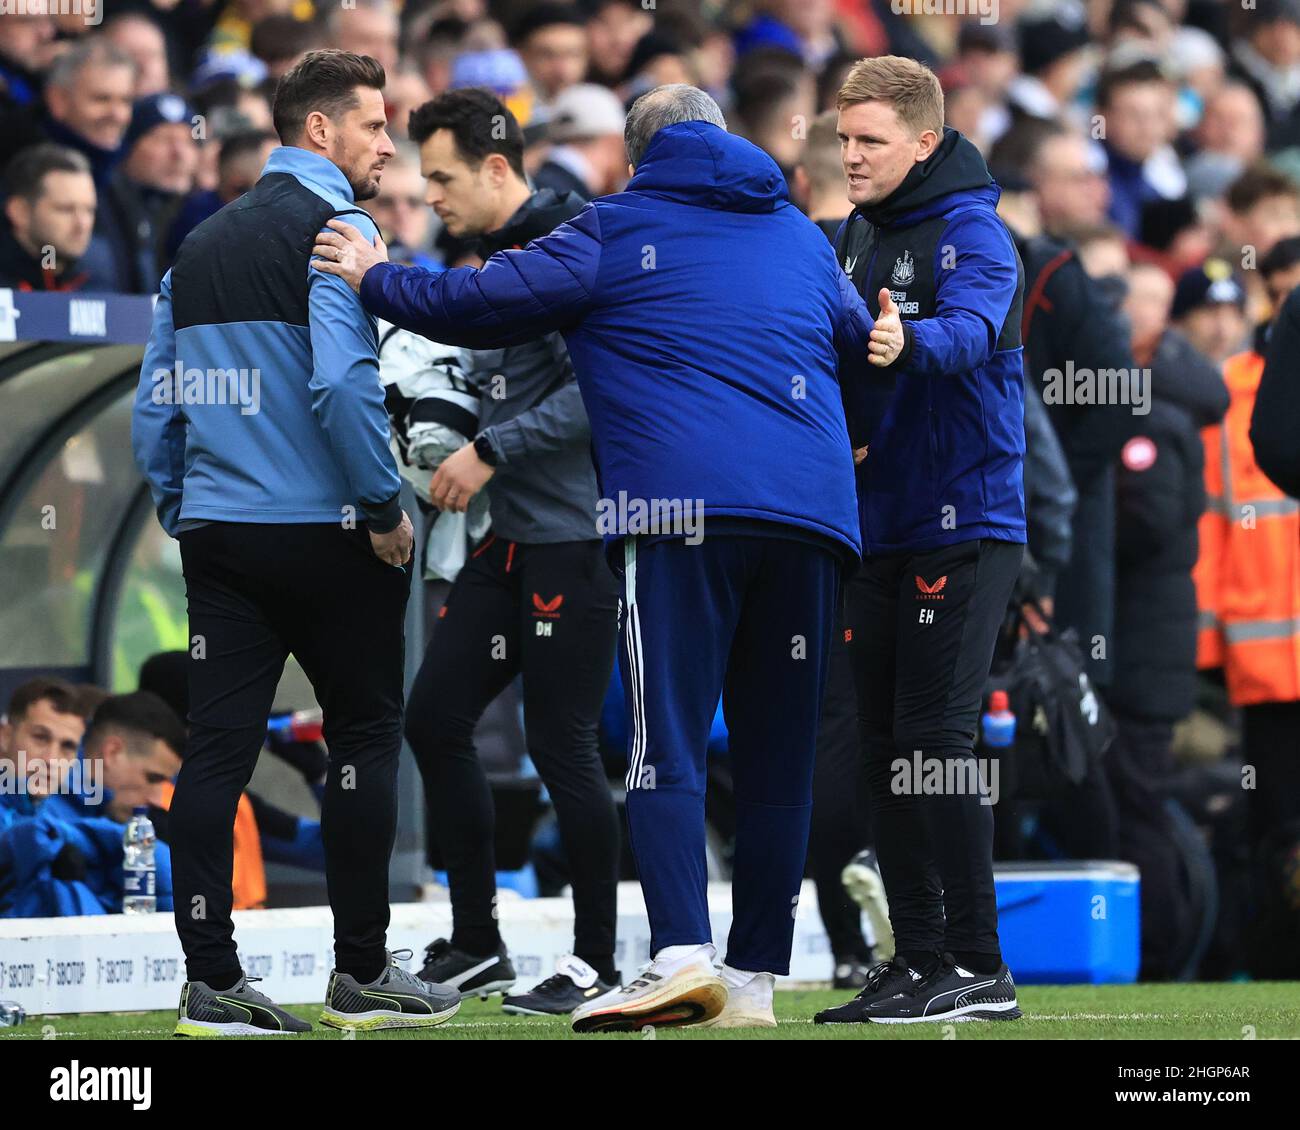 Leeds, UK. 22nd Jan, 2022. Marcelo Bielsa manager of Leeds United and Eddie Howe manager of Newcastle United shake hands before the Premier League fixture Leeds United vs Newcastle United at Elland Road, Leeds, UK, 22nd January 2022 Credit: News Images /Alamy Live News Stock Photo